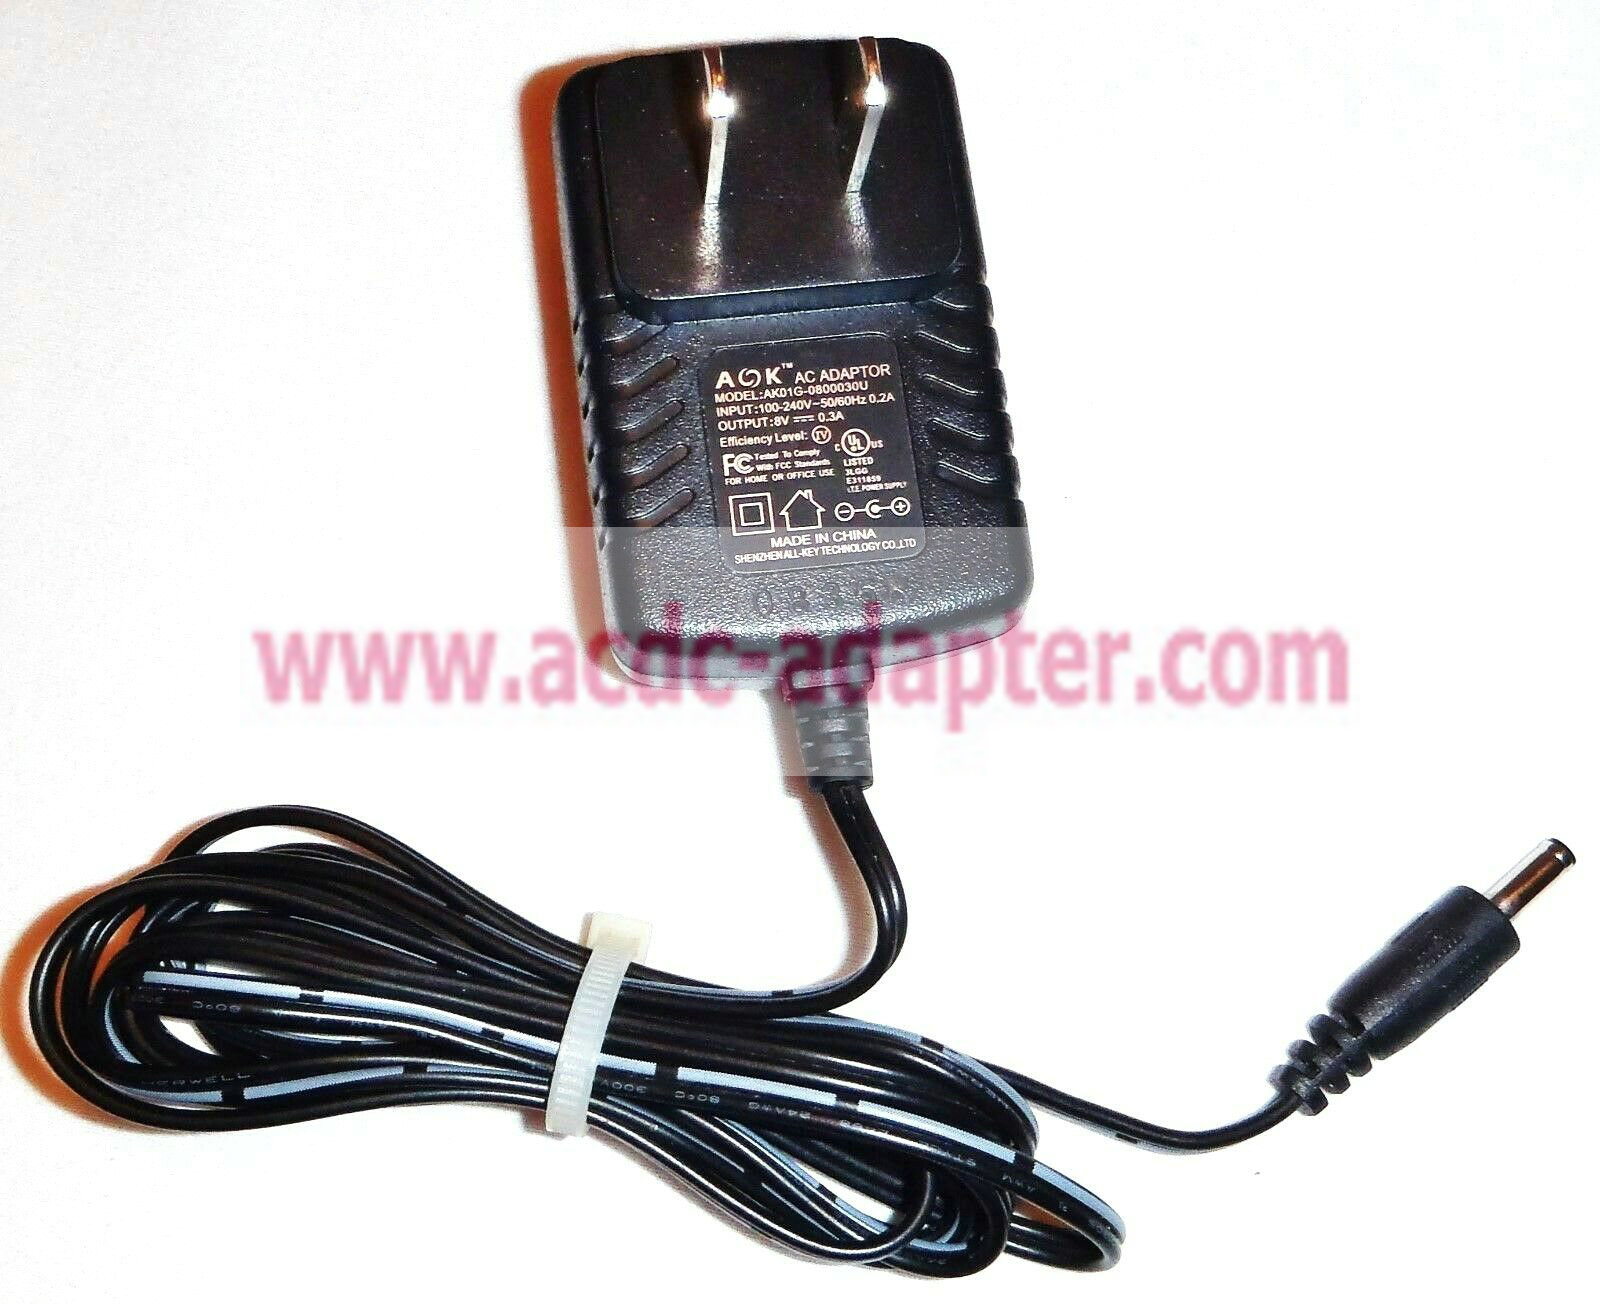 Genuine AOK AK01G-0800030U 8V 0.3A AC/DC Power Supply Battery Charger Adapter - Click Image to Close